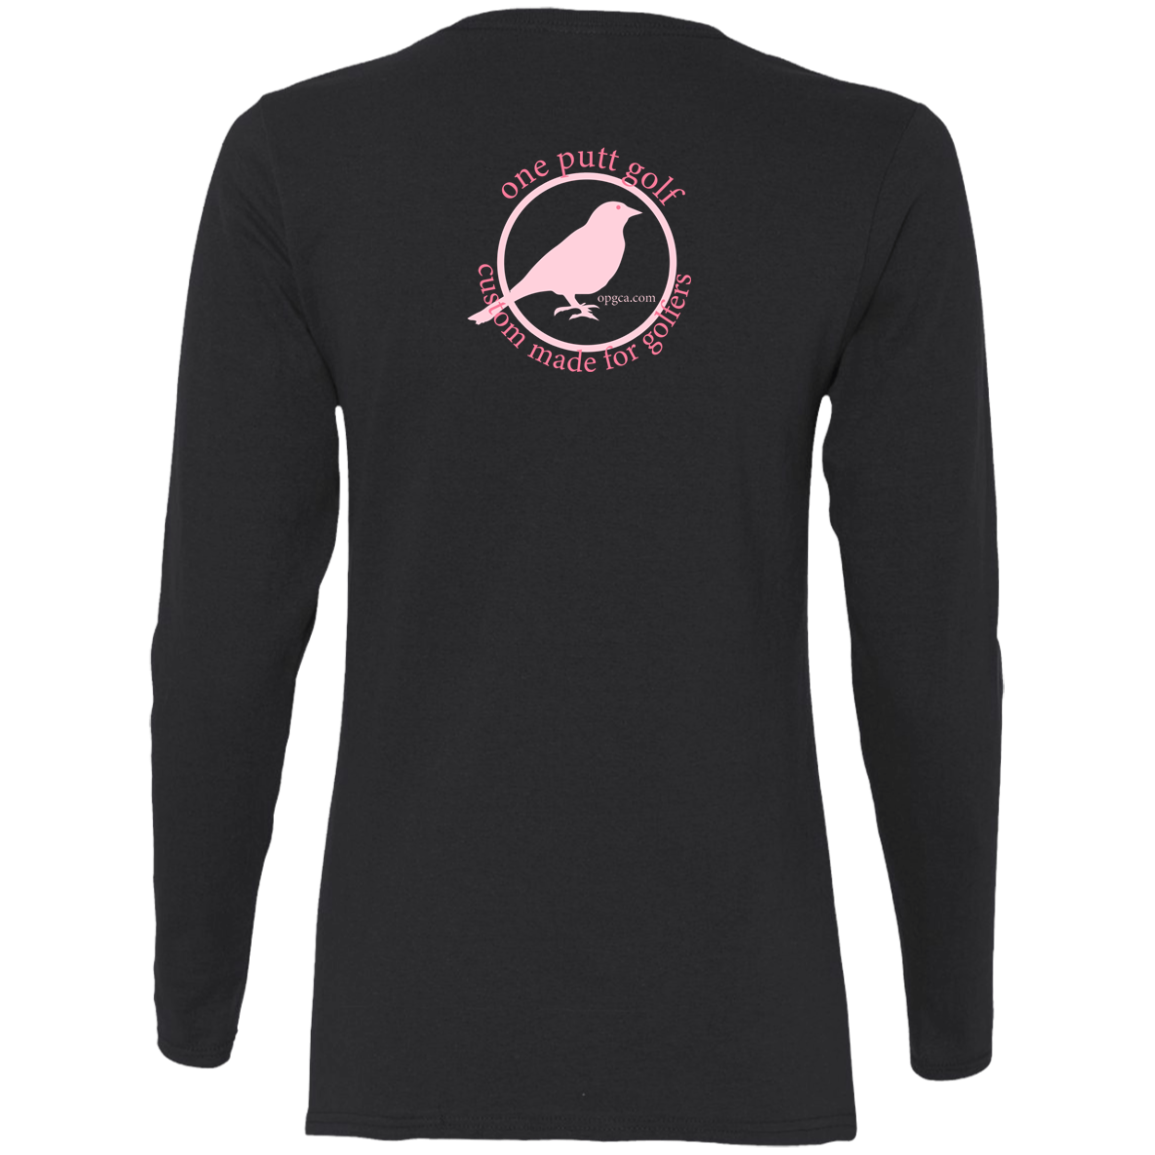 OPG Custom Design # 24. Ornithologist. A person who studies or is an expert on birds. Ladies' 100% Cotton T-Shirt